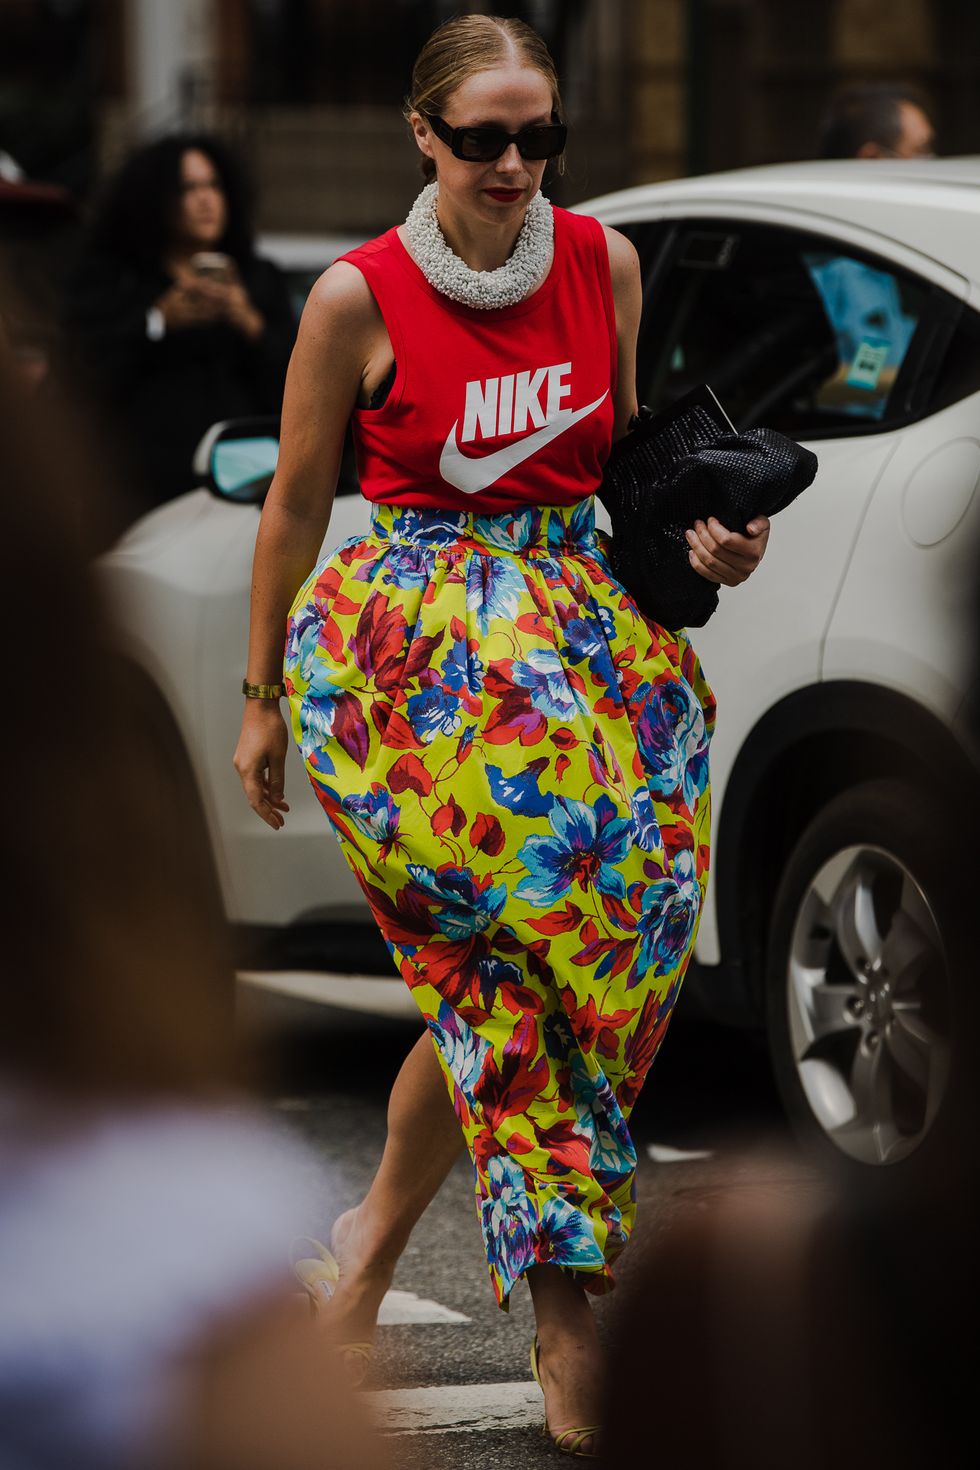 What will the street style stars be wearing this fashion month?